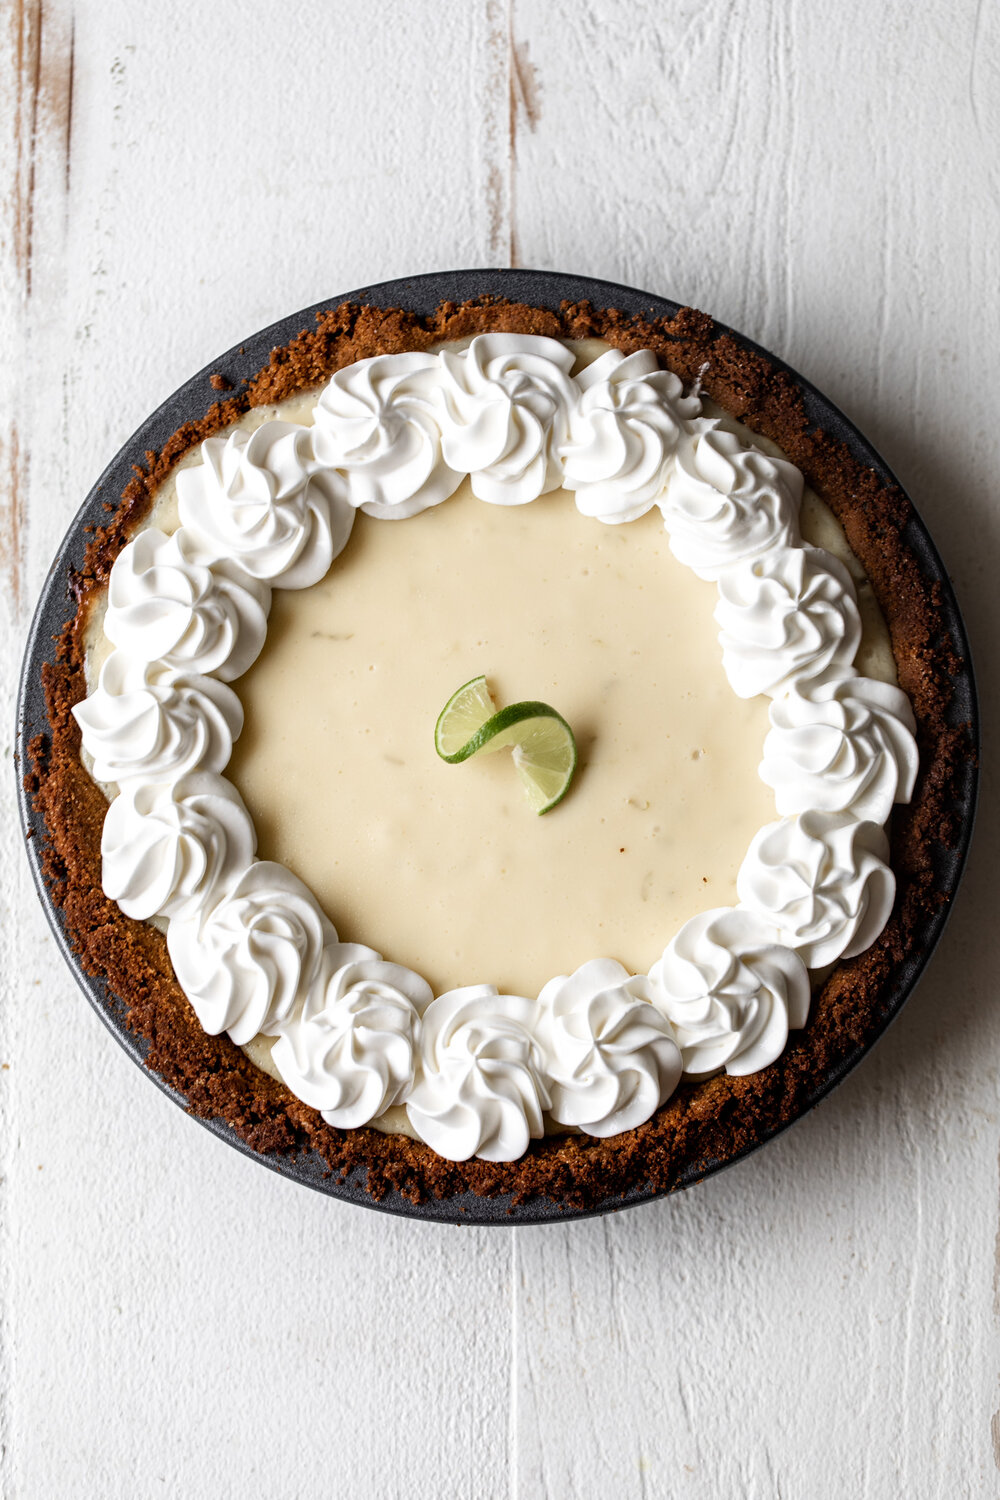 summer dessert key lime pie recipe is made with key lime juice and condensed milk topped with sour cream whipped cream